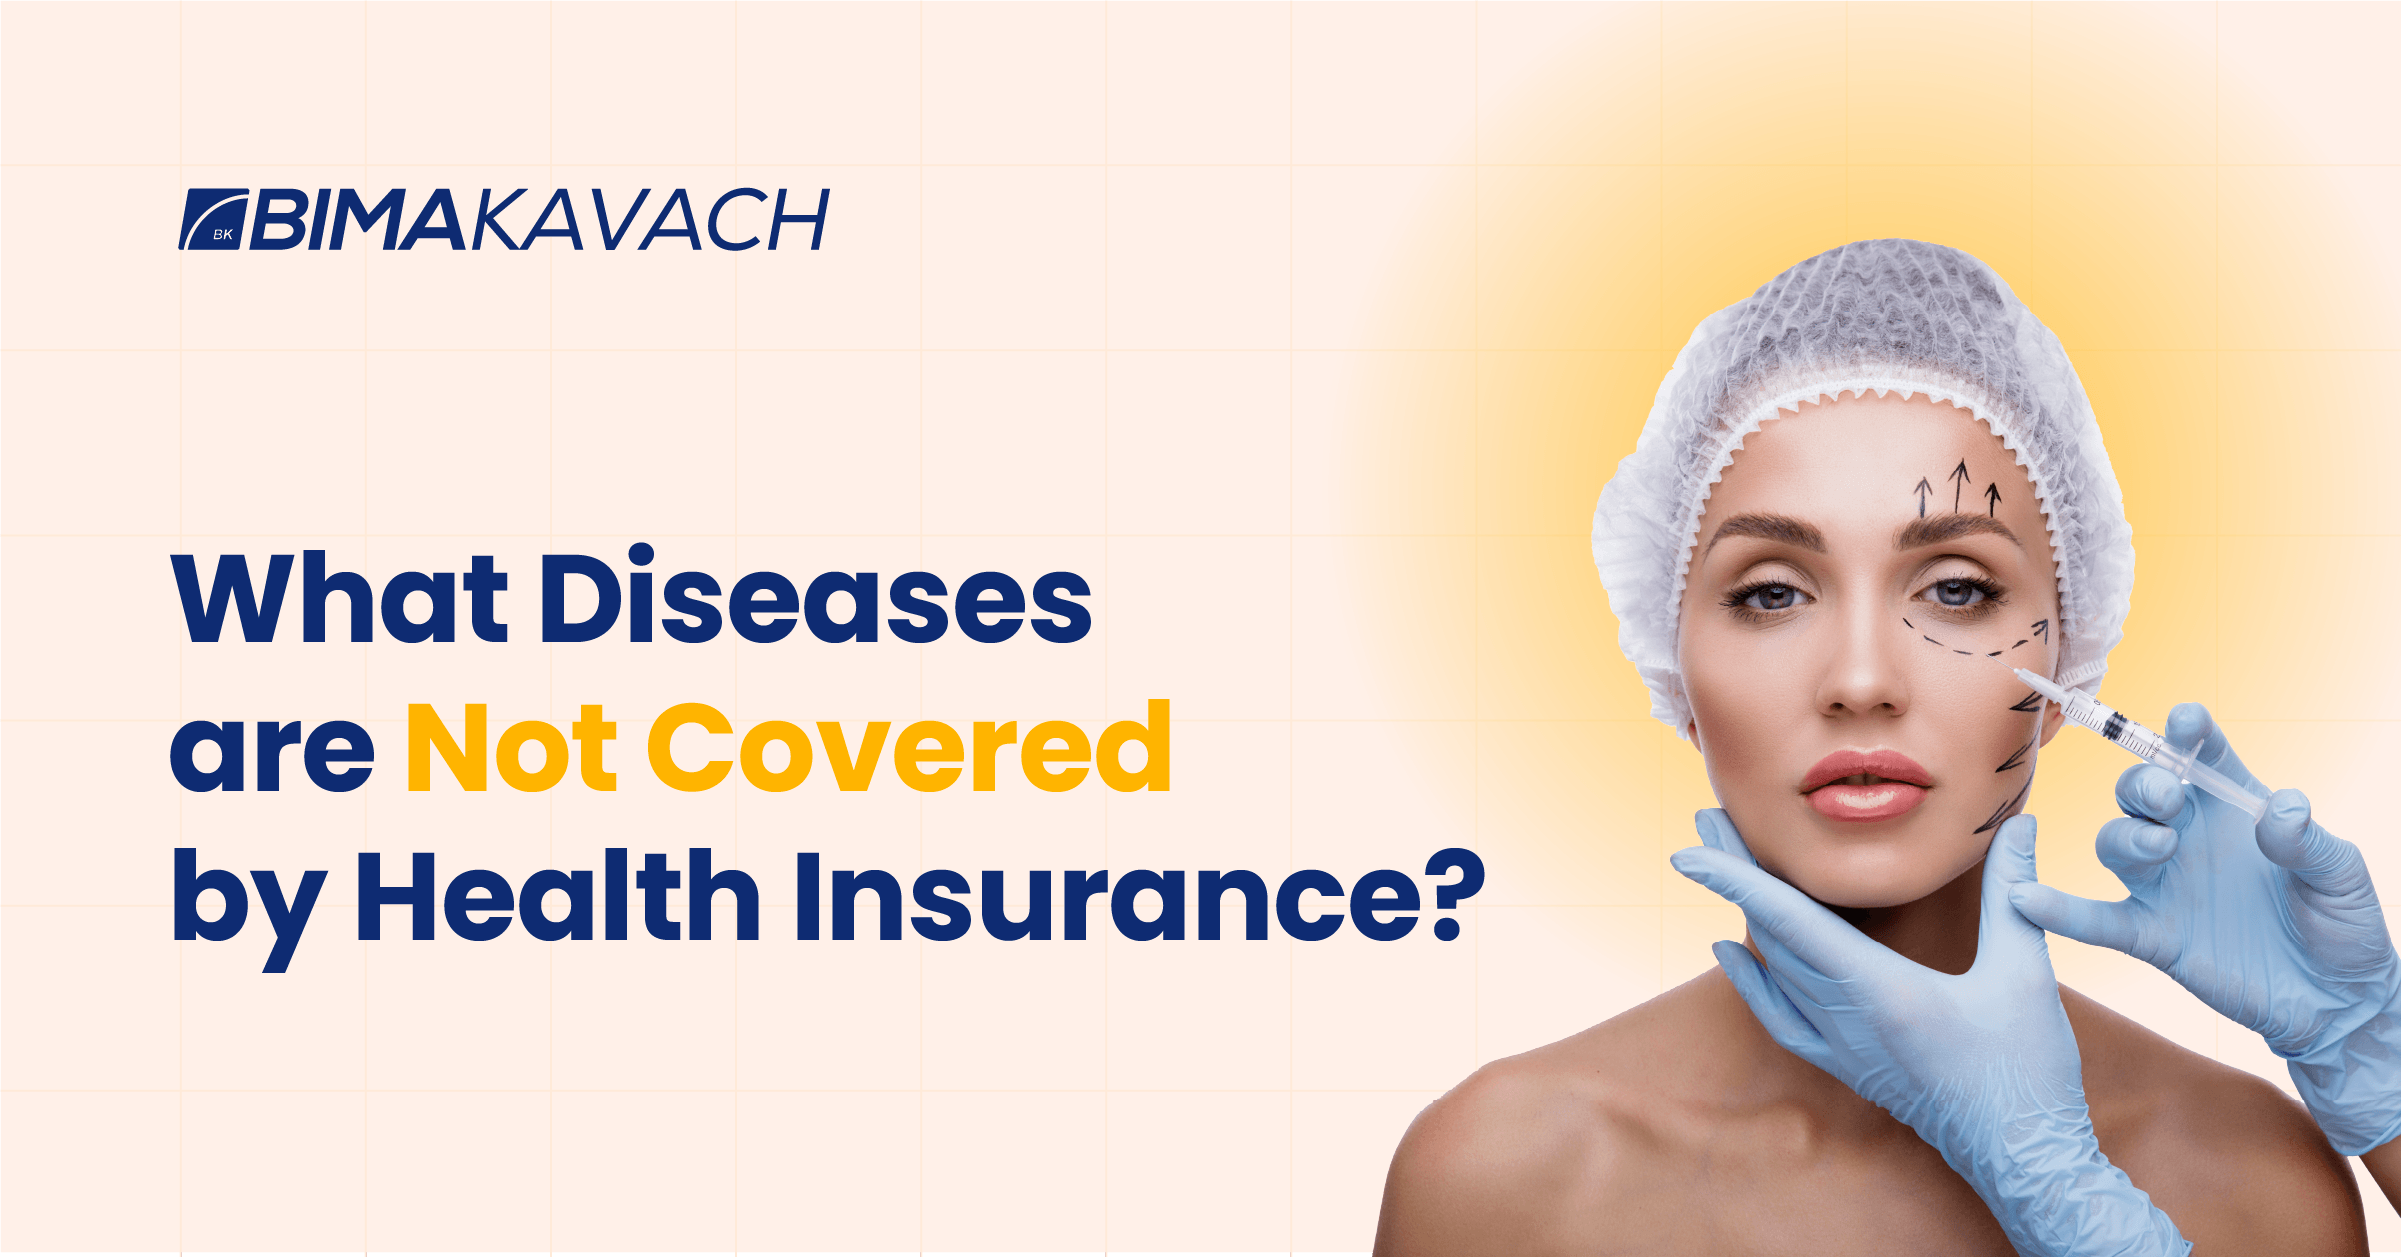 What Diseases are Not Covered by Health Insurance?